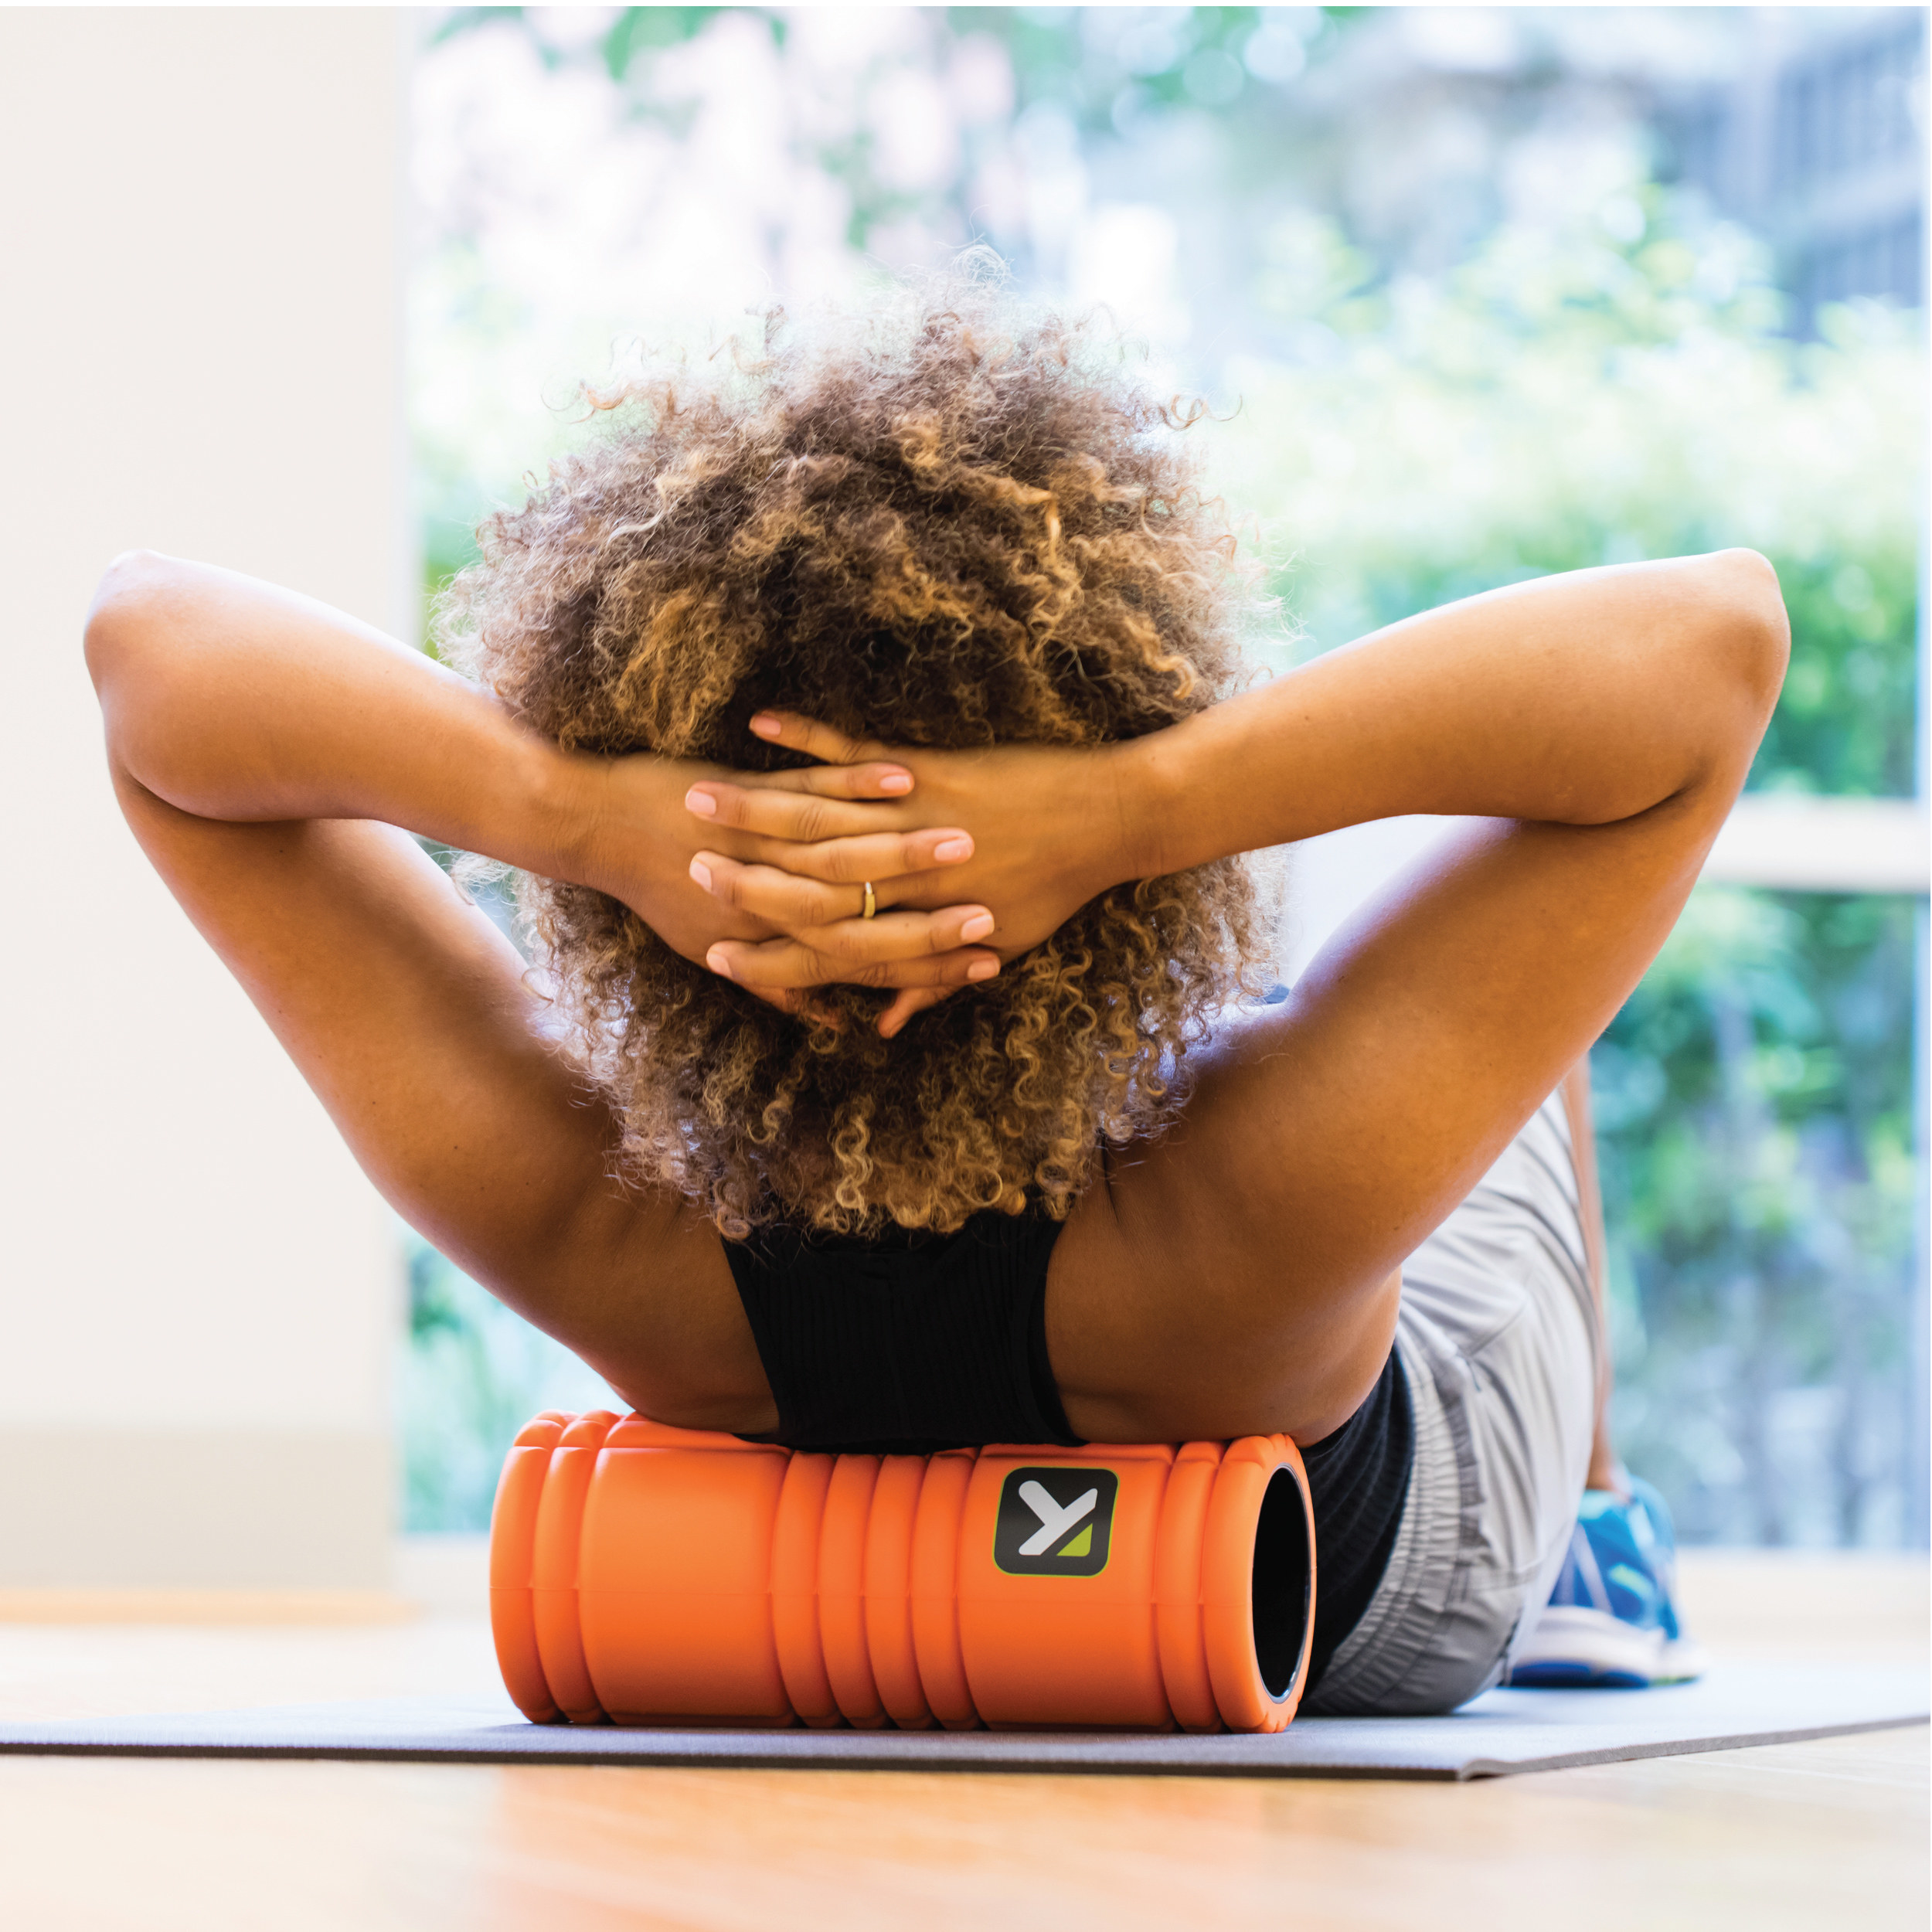 Model doing crunches while leaning back on the orange foam roller